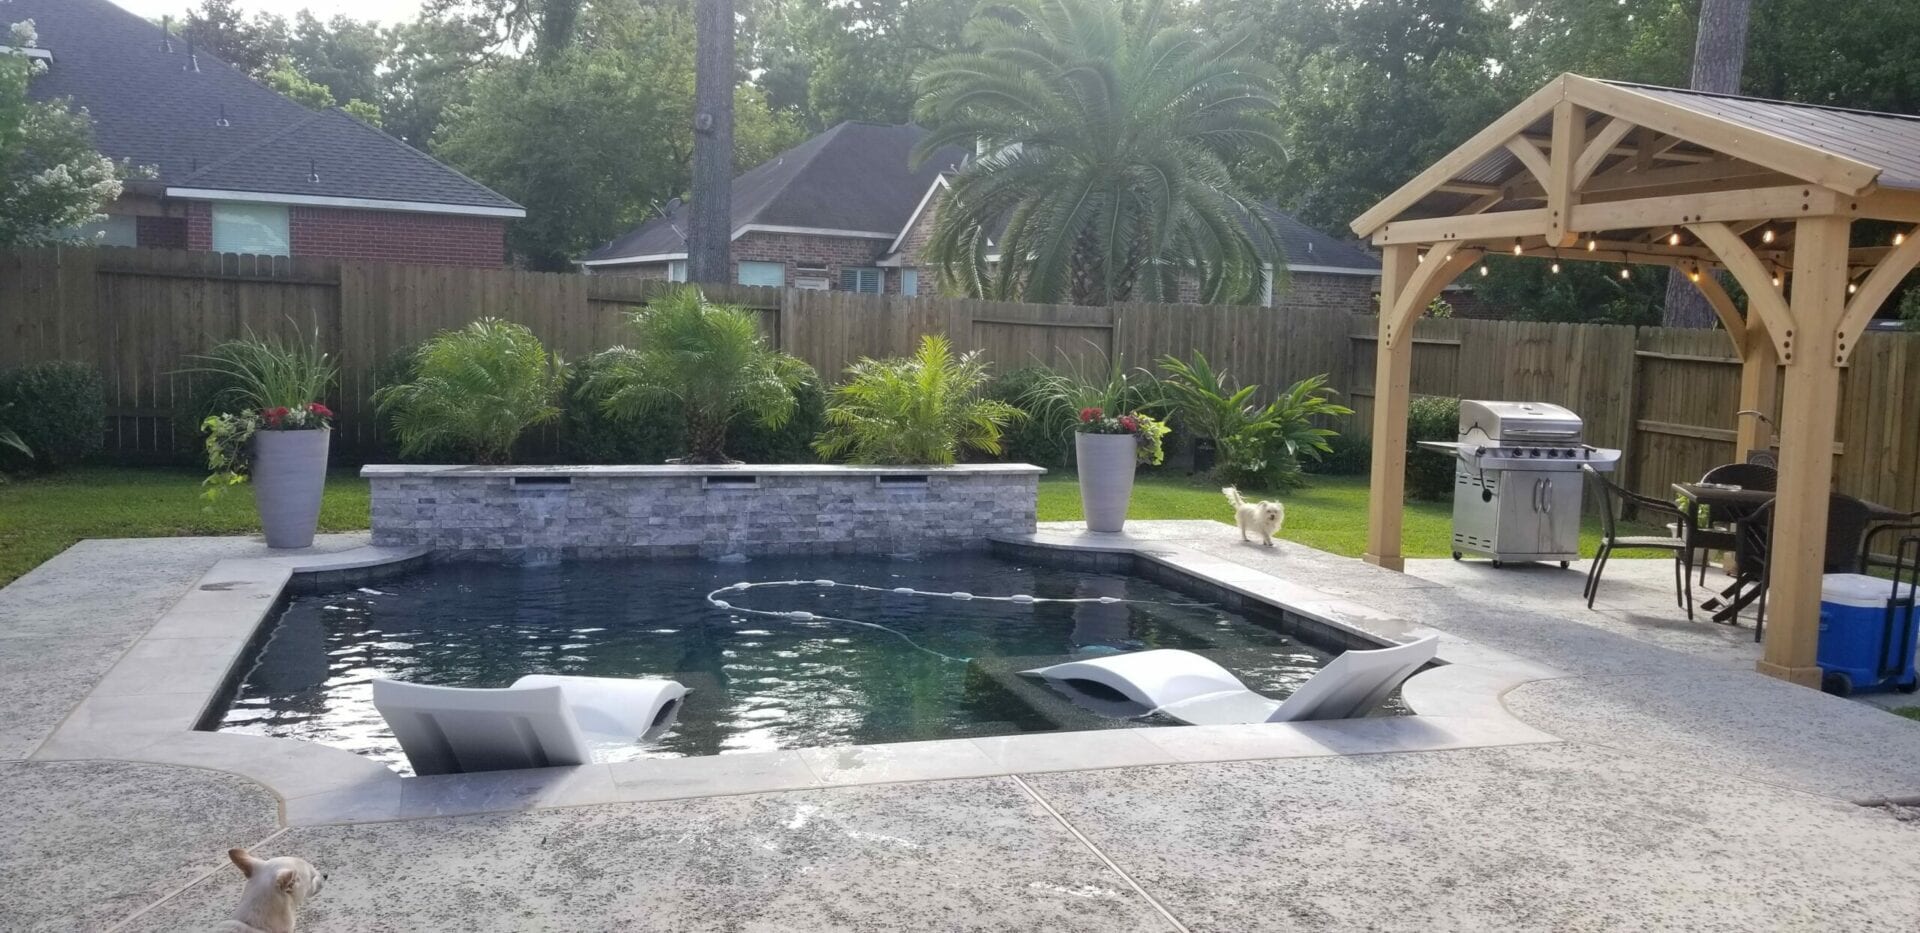 A pool with a dog sitting in it